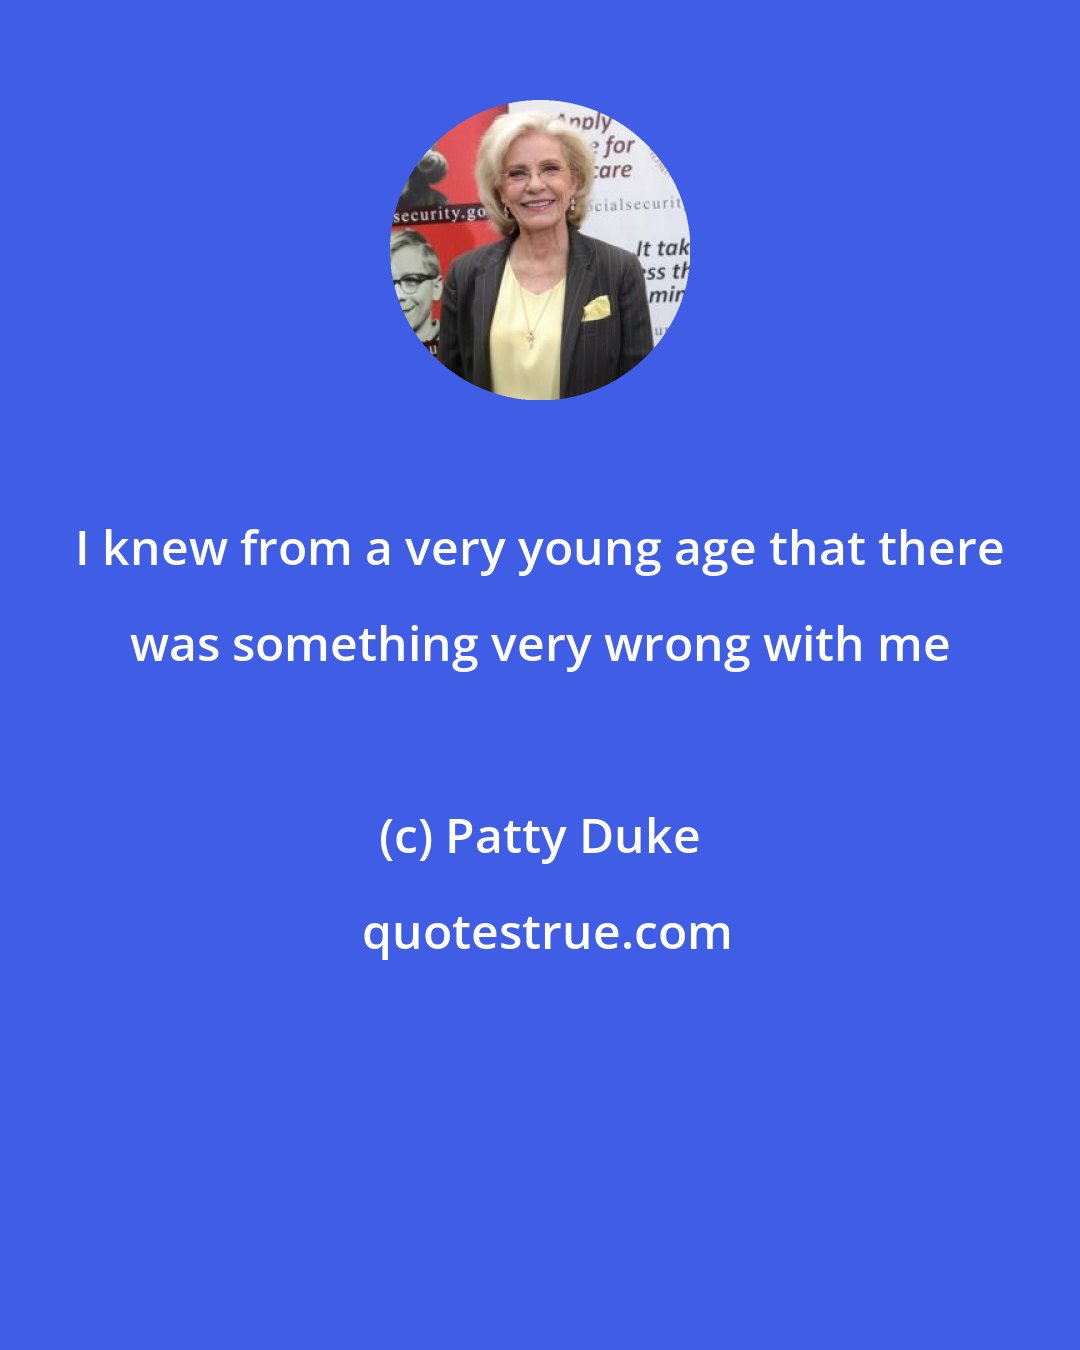 Patty Duke: I knew from a very young age that there was something very wrong with me